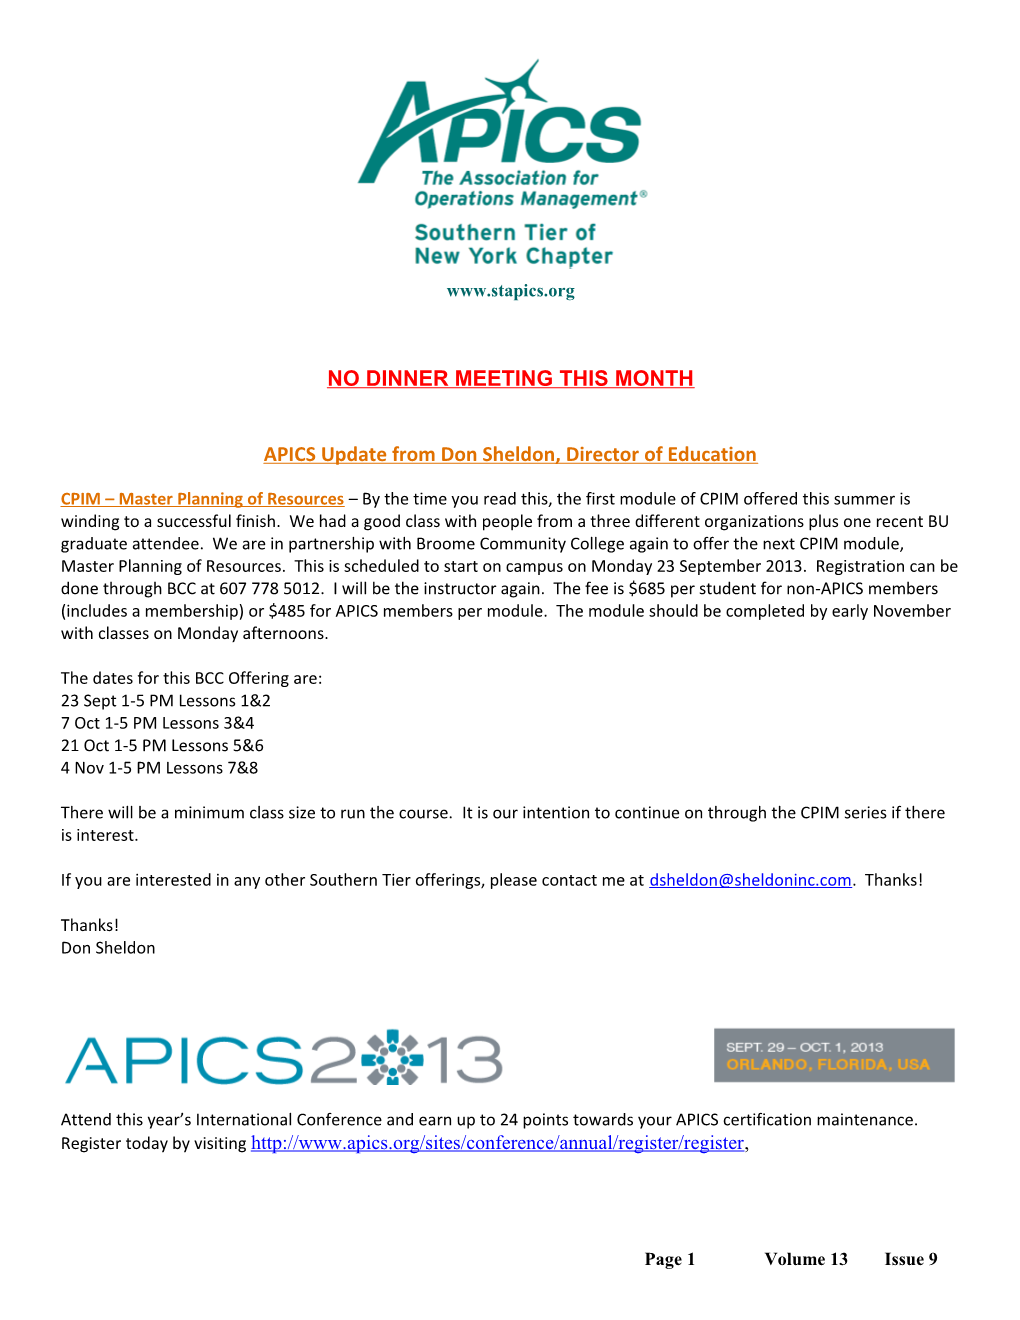 APICS Update from Don Sheldon, Director of Education